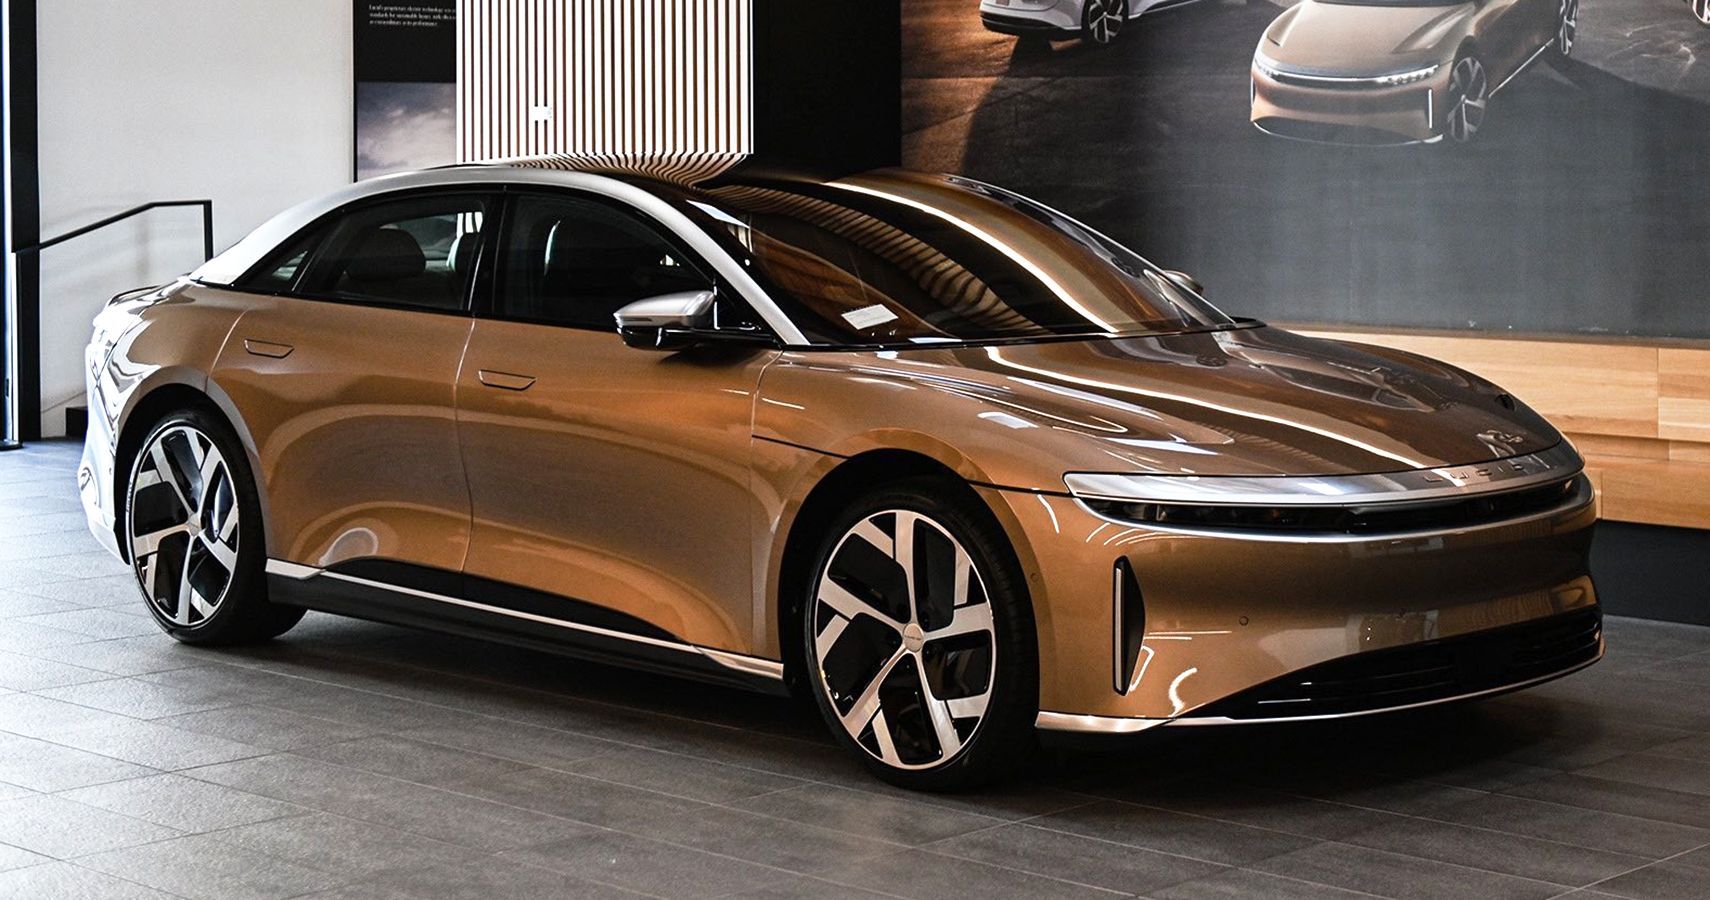 A Brief History Of The Lucid Air